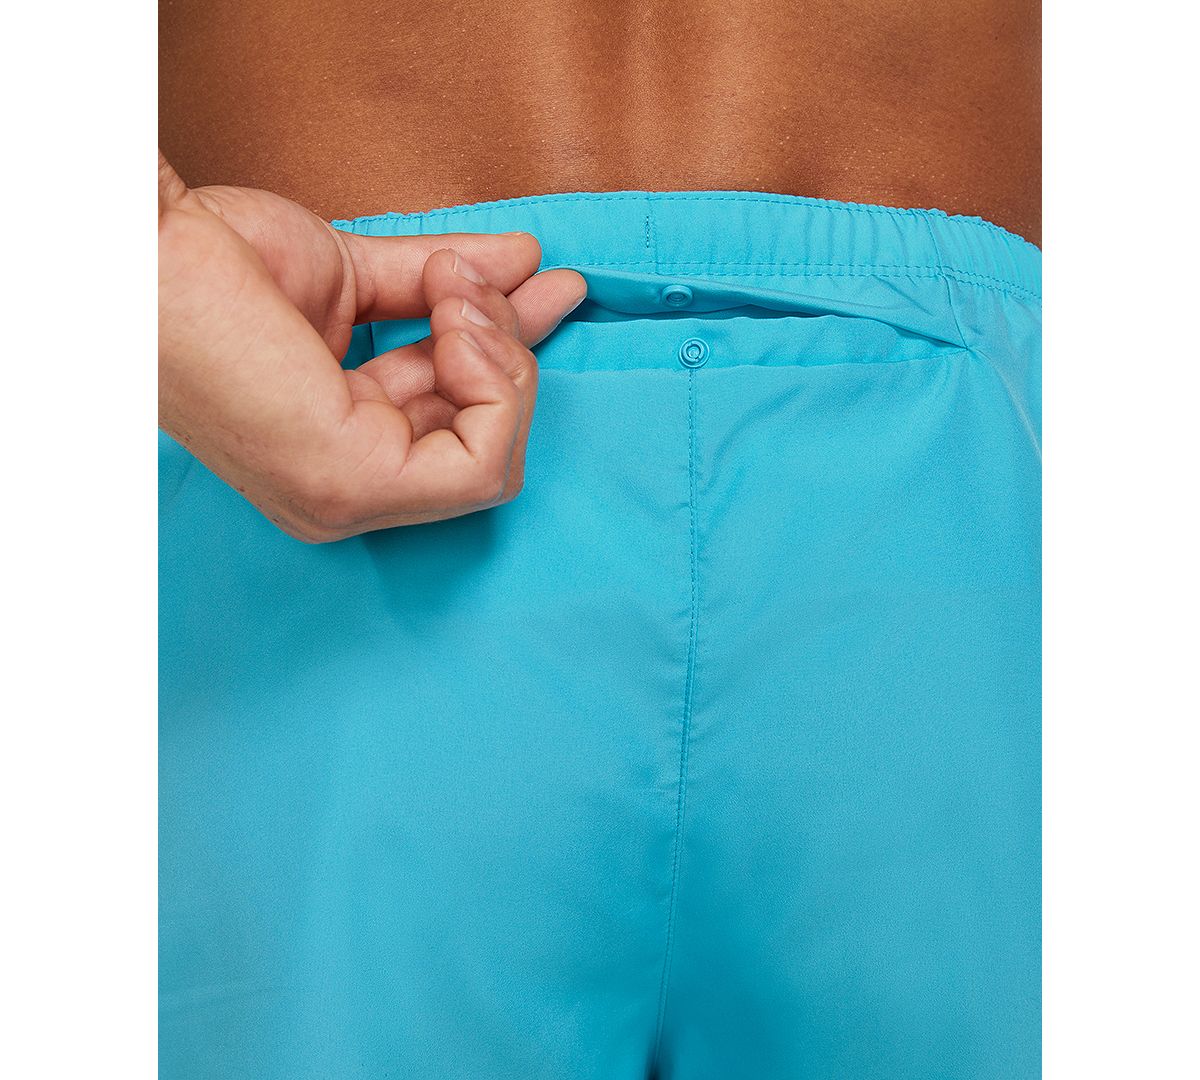 Nike Challenger Brief-lined 5" Running Shorts Chlorine